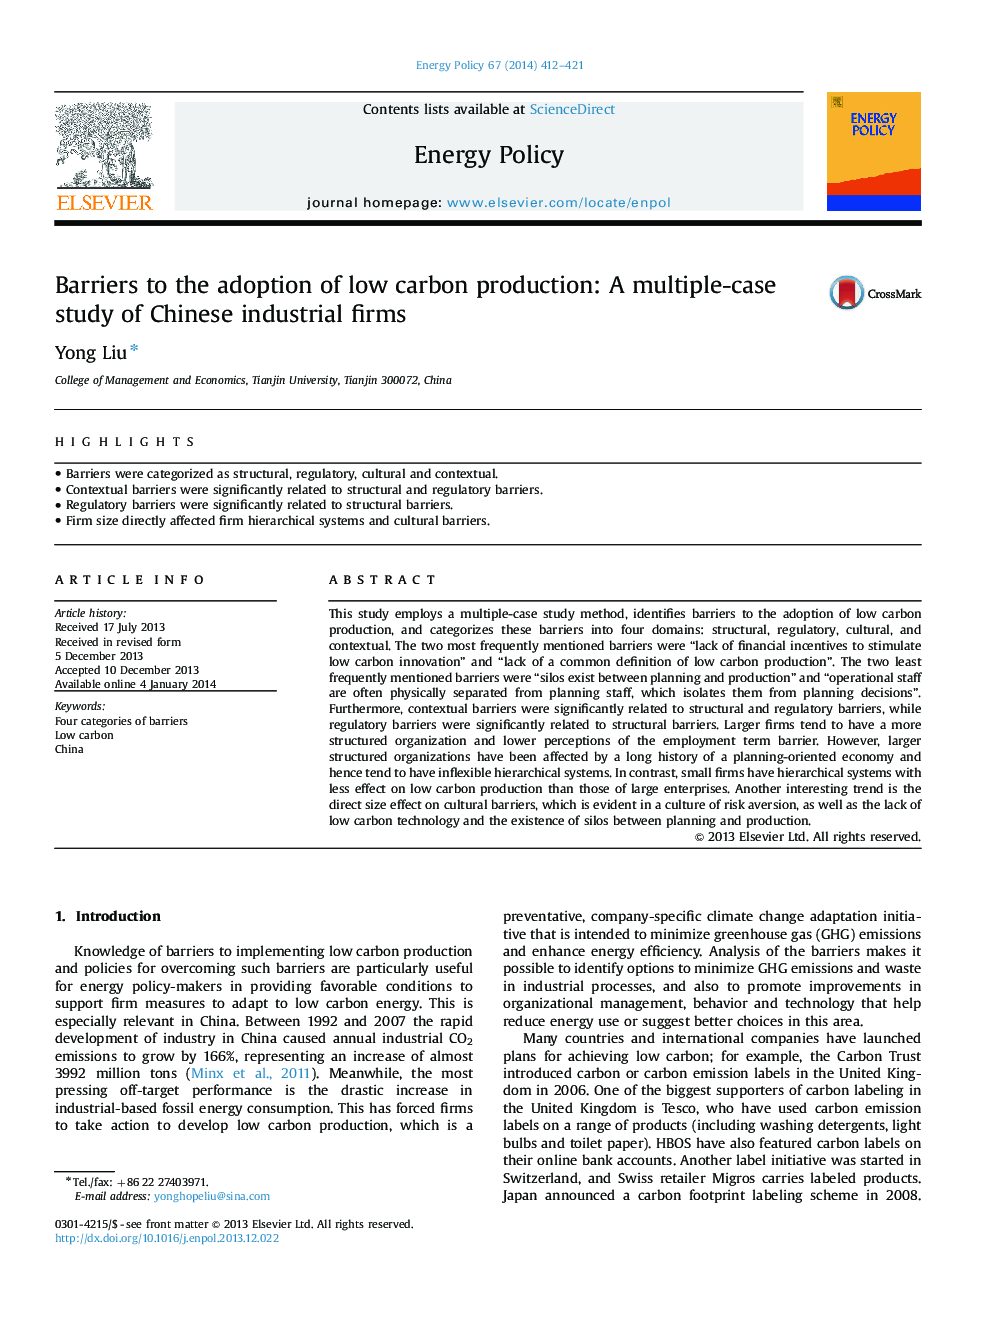 Barriers to the adoption of low carbon production: A multiple-case study of Chinese industrial firms